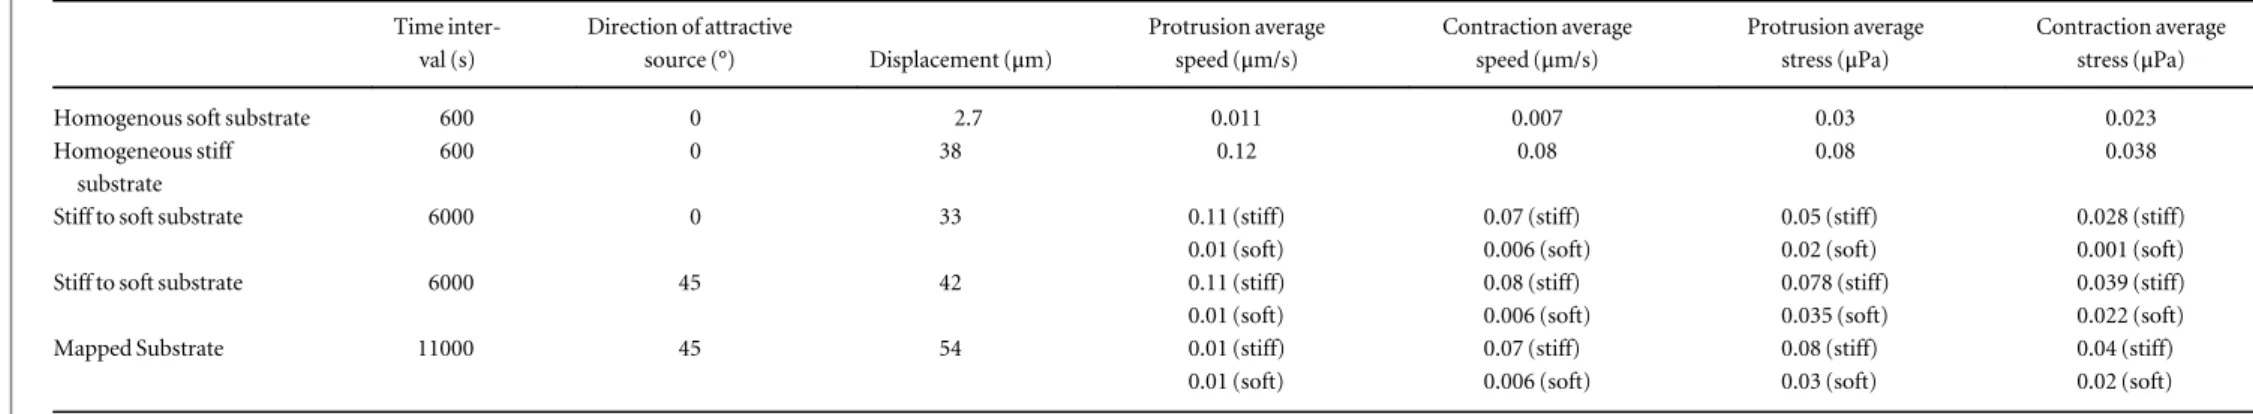 Table 2. Quantitative results for the numerical simulations. Time  inter-val (s) Direction of attractivesource (°) Displacement ( μ m) Protrusion averagespeed (μm/s) Contraction averagespeed (μm/s) Protrusion averagestress (μPa) Contraction averagestress (